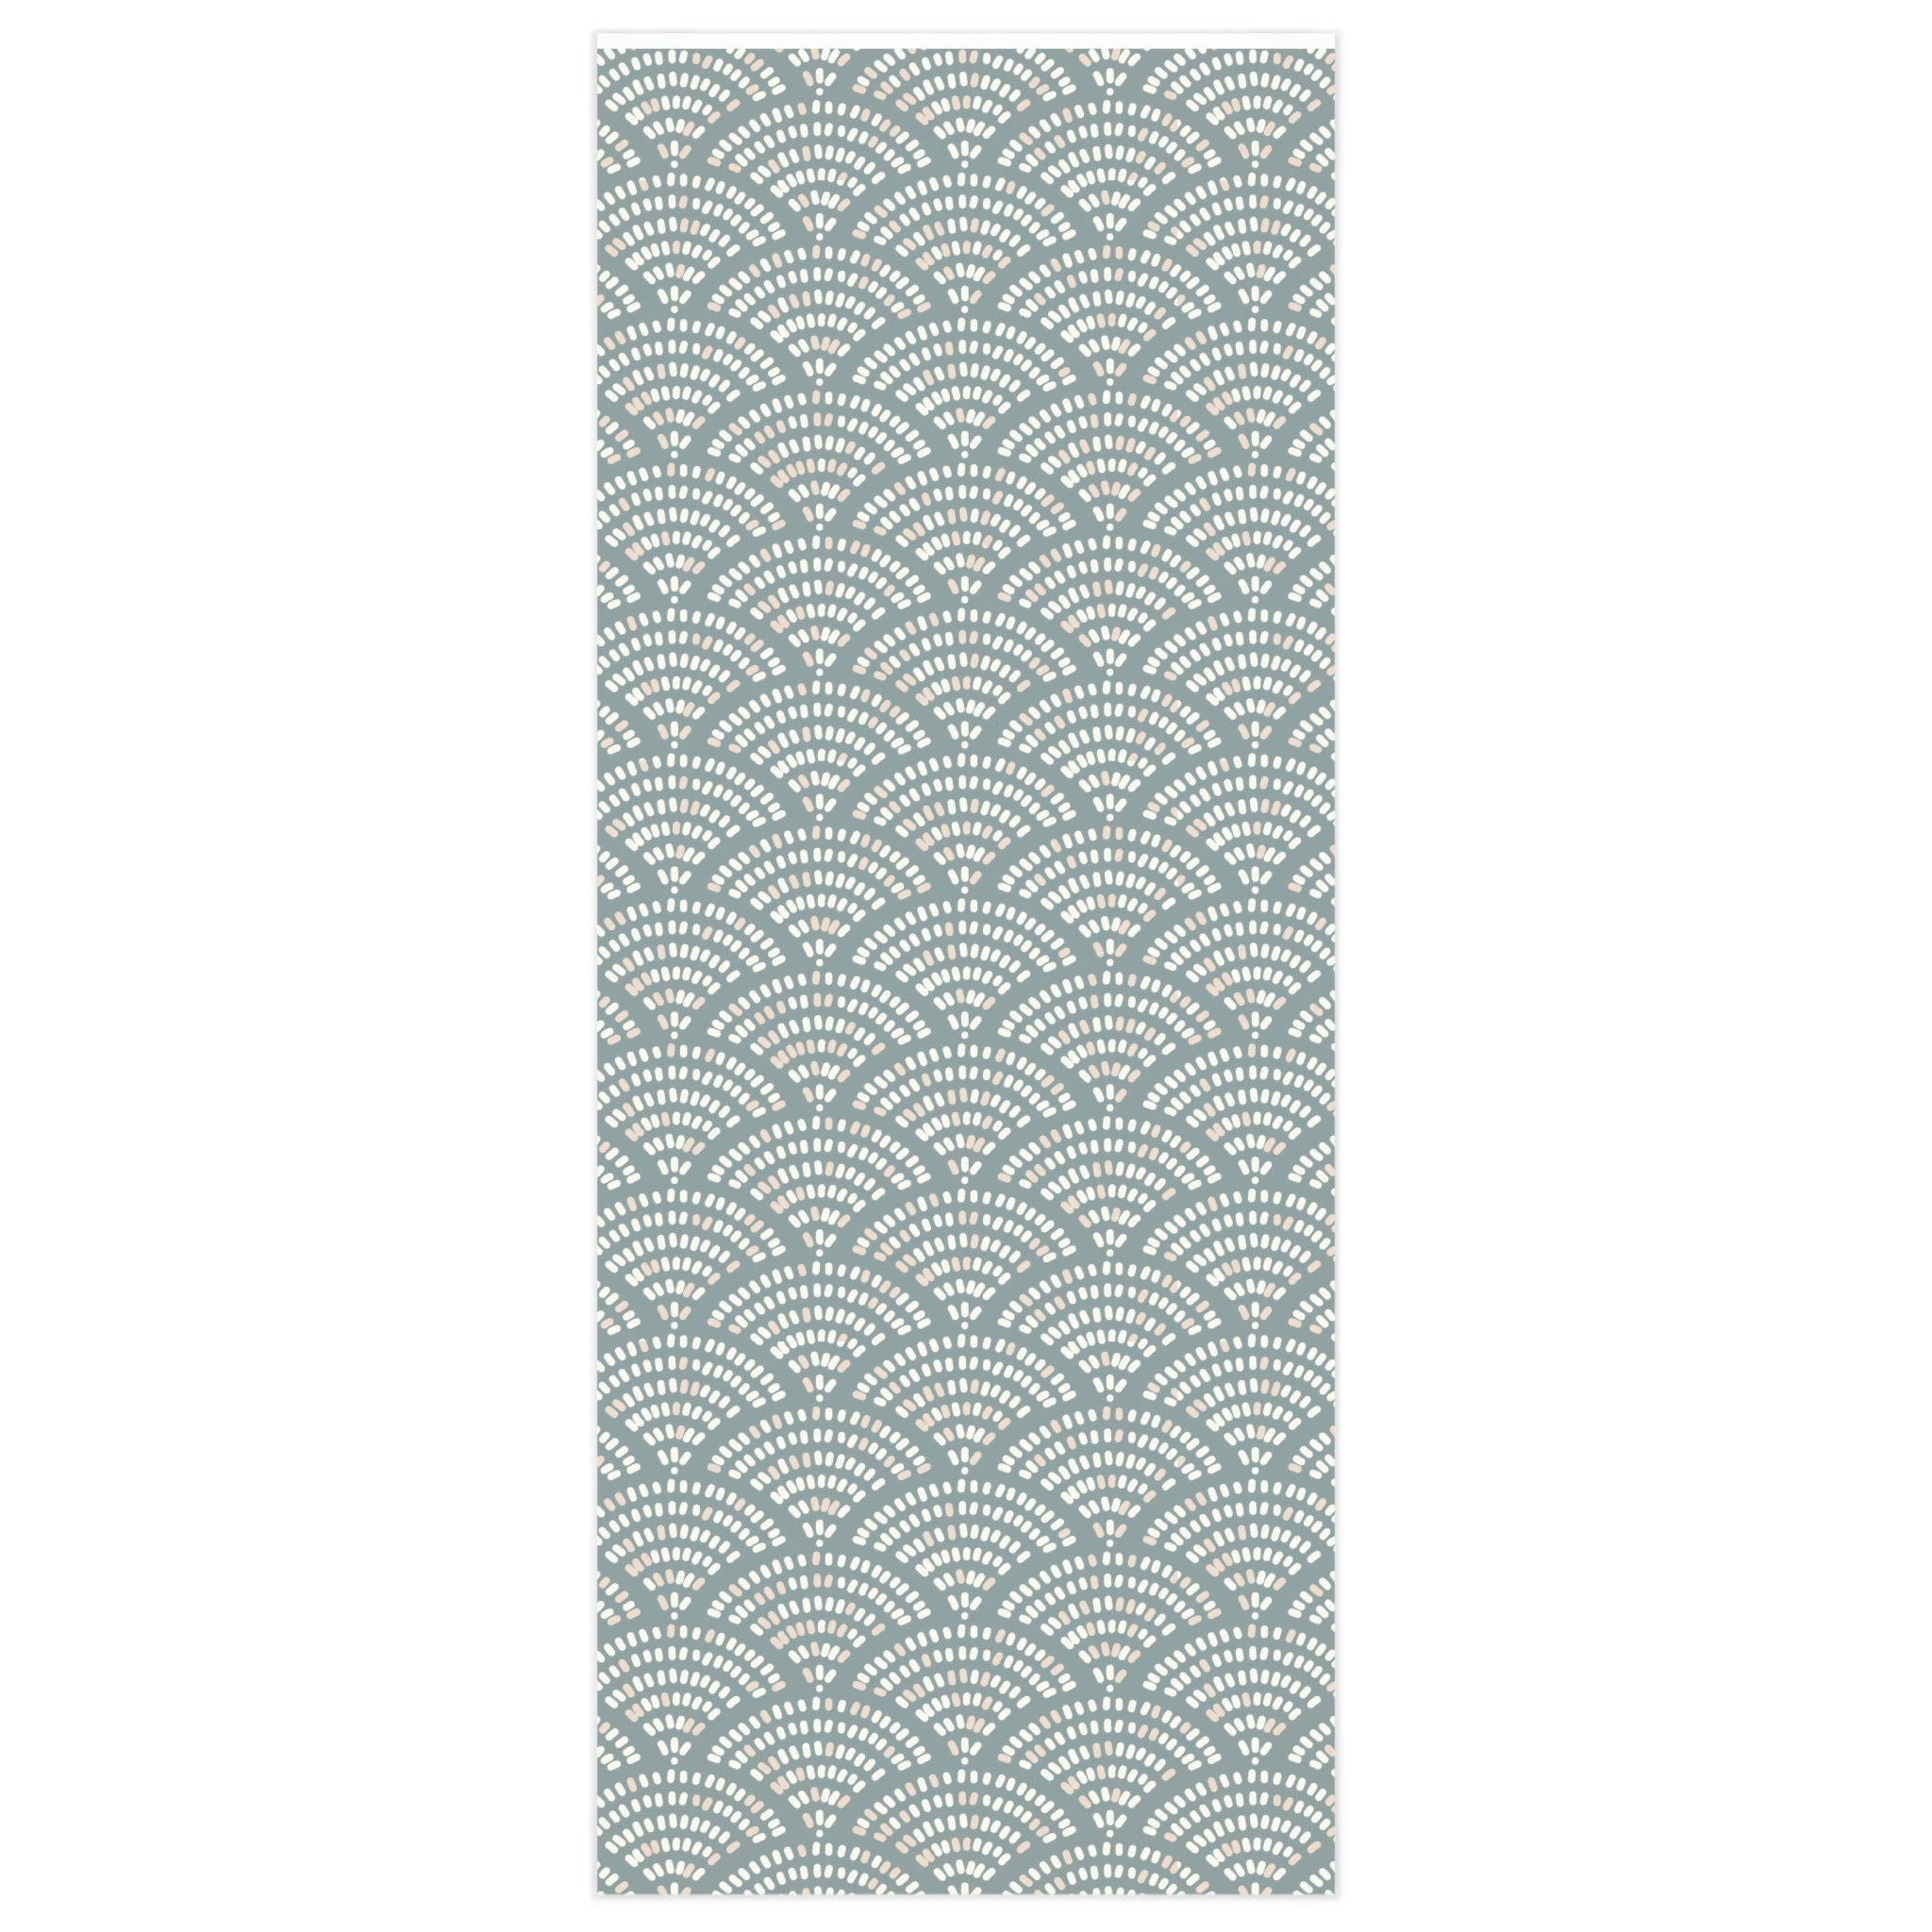 Abstract Sage Green Wrapping Paper